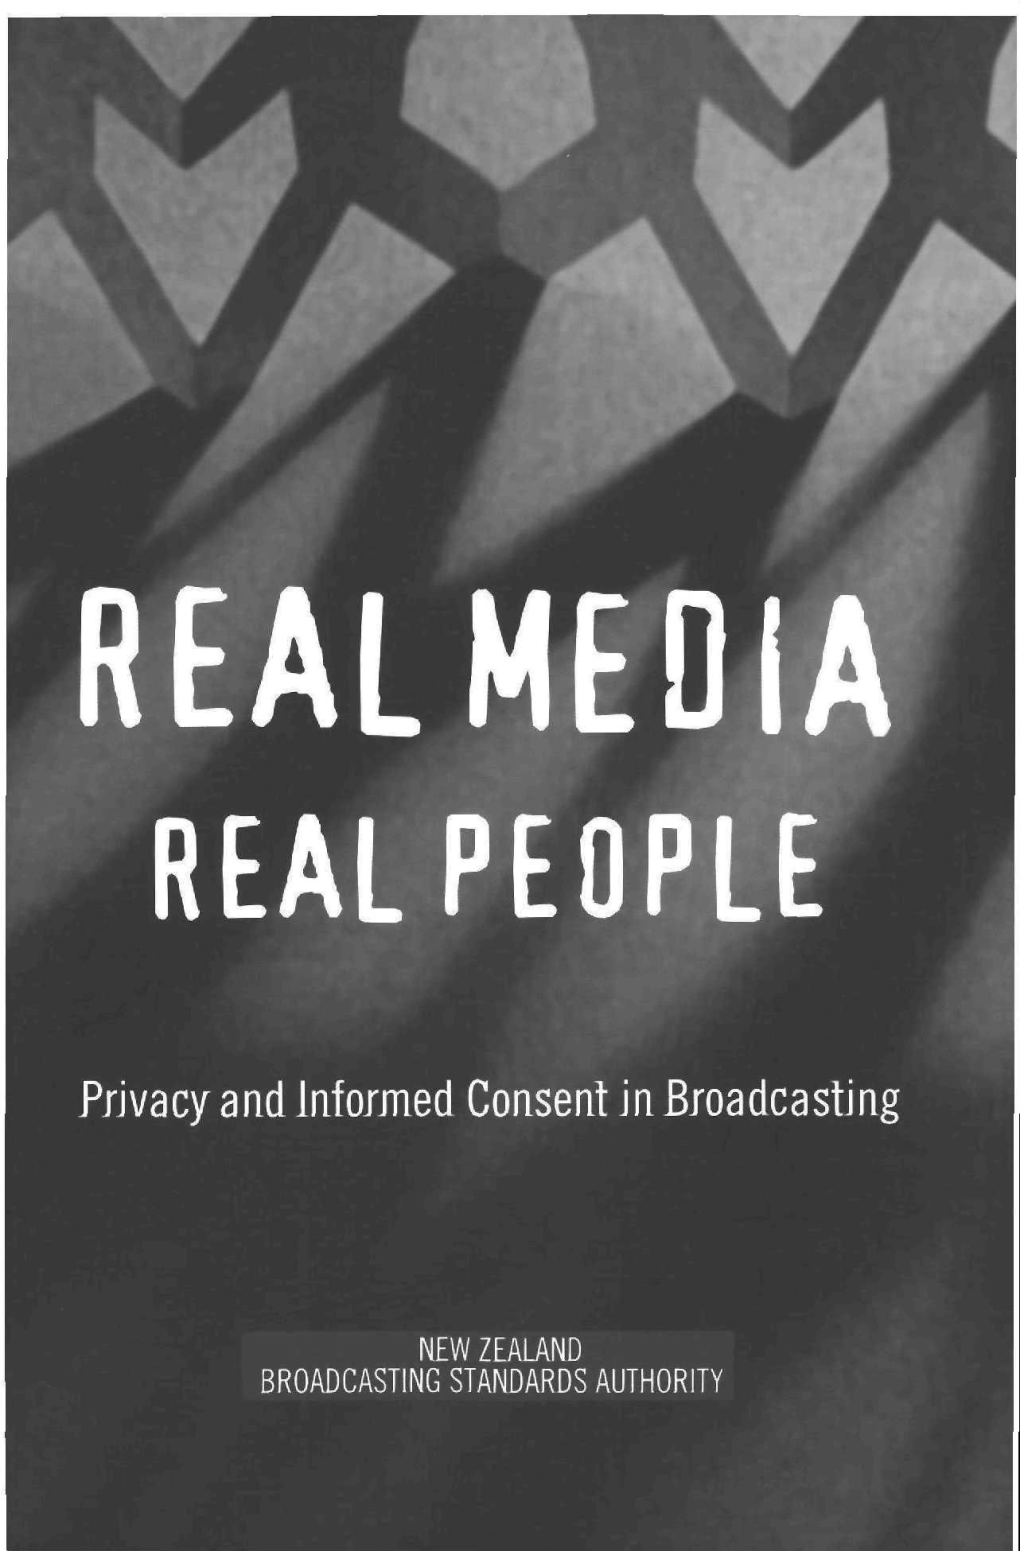 Privacy and Informed Consent in Broadcasting